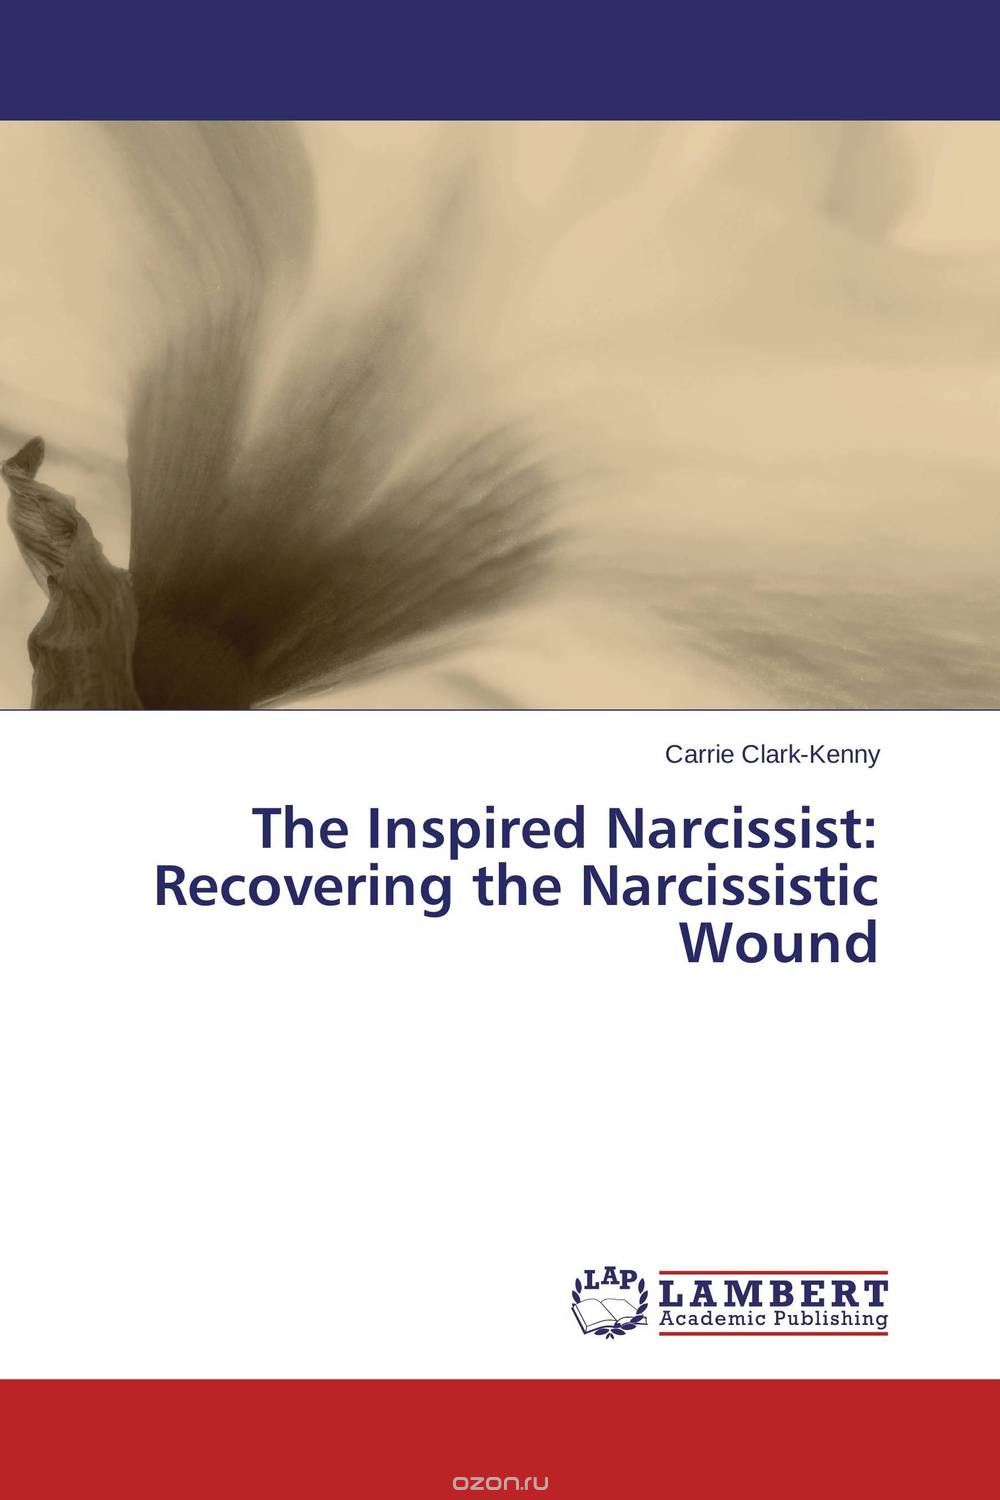 Скачать книгу "The Inspired Narcissist: Recovering the Narcissistic Wound"